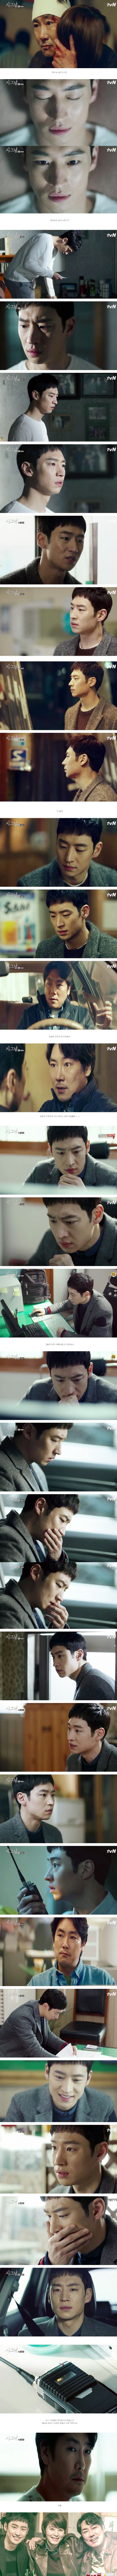 final episodes 15 and 16 captures for the Korean drama 'Signal'